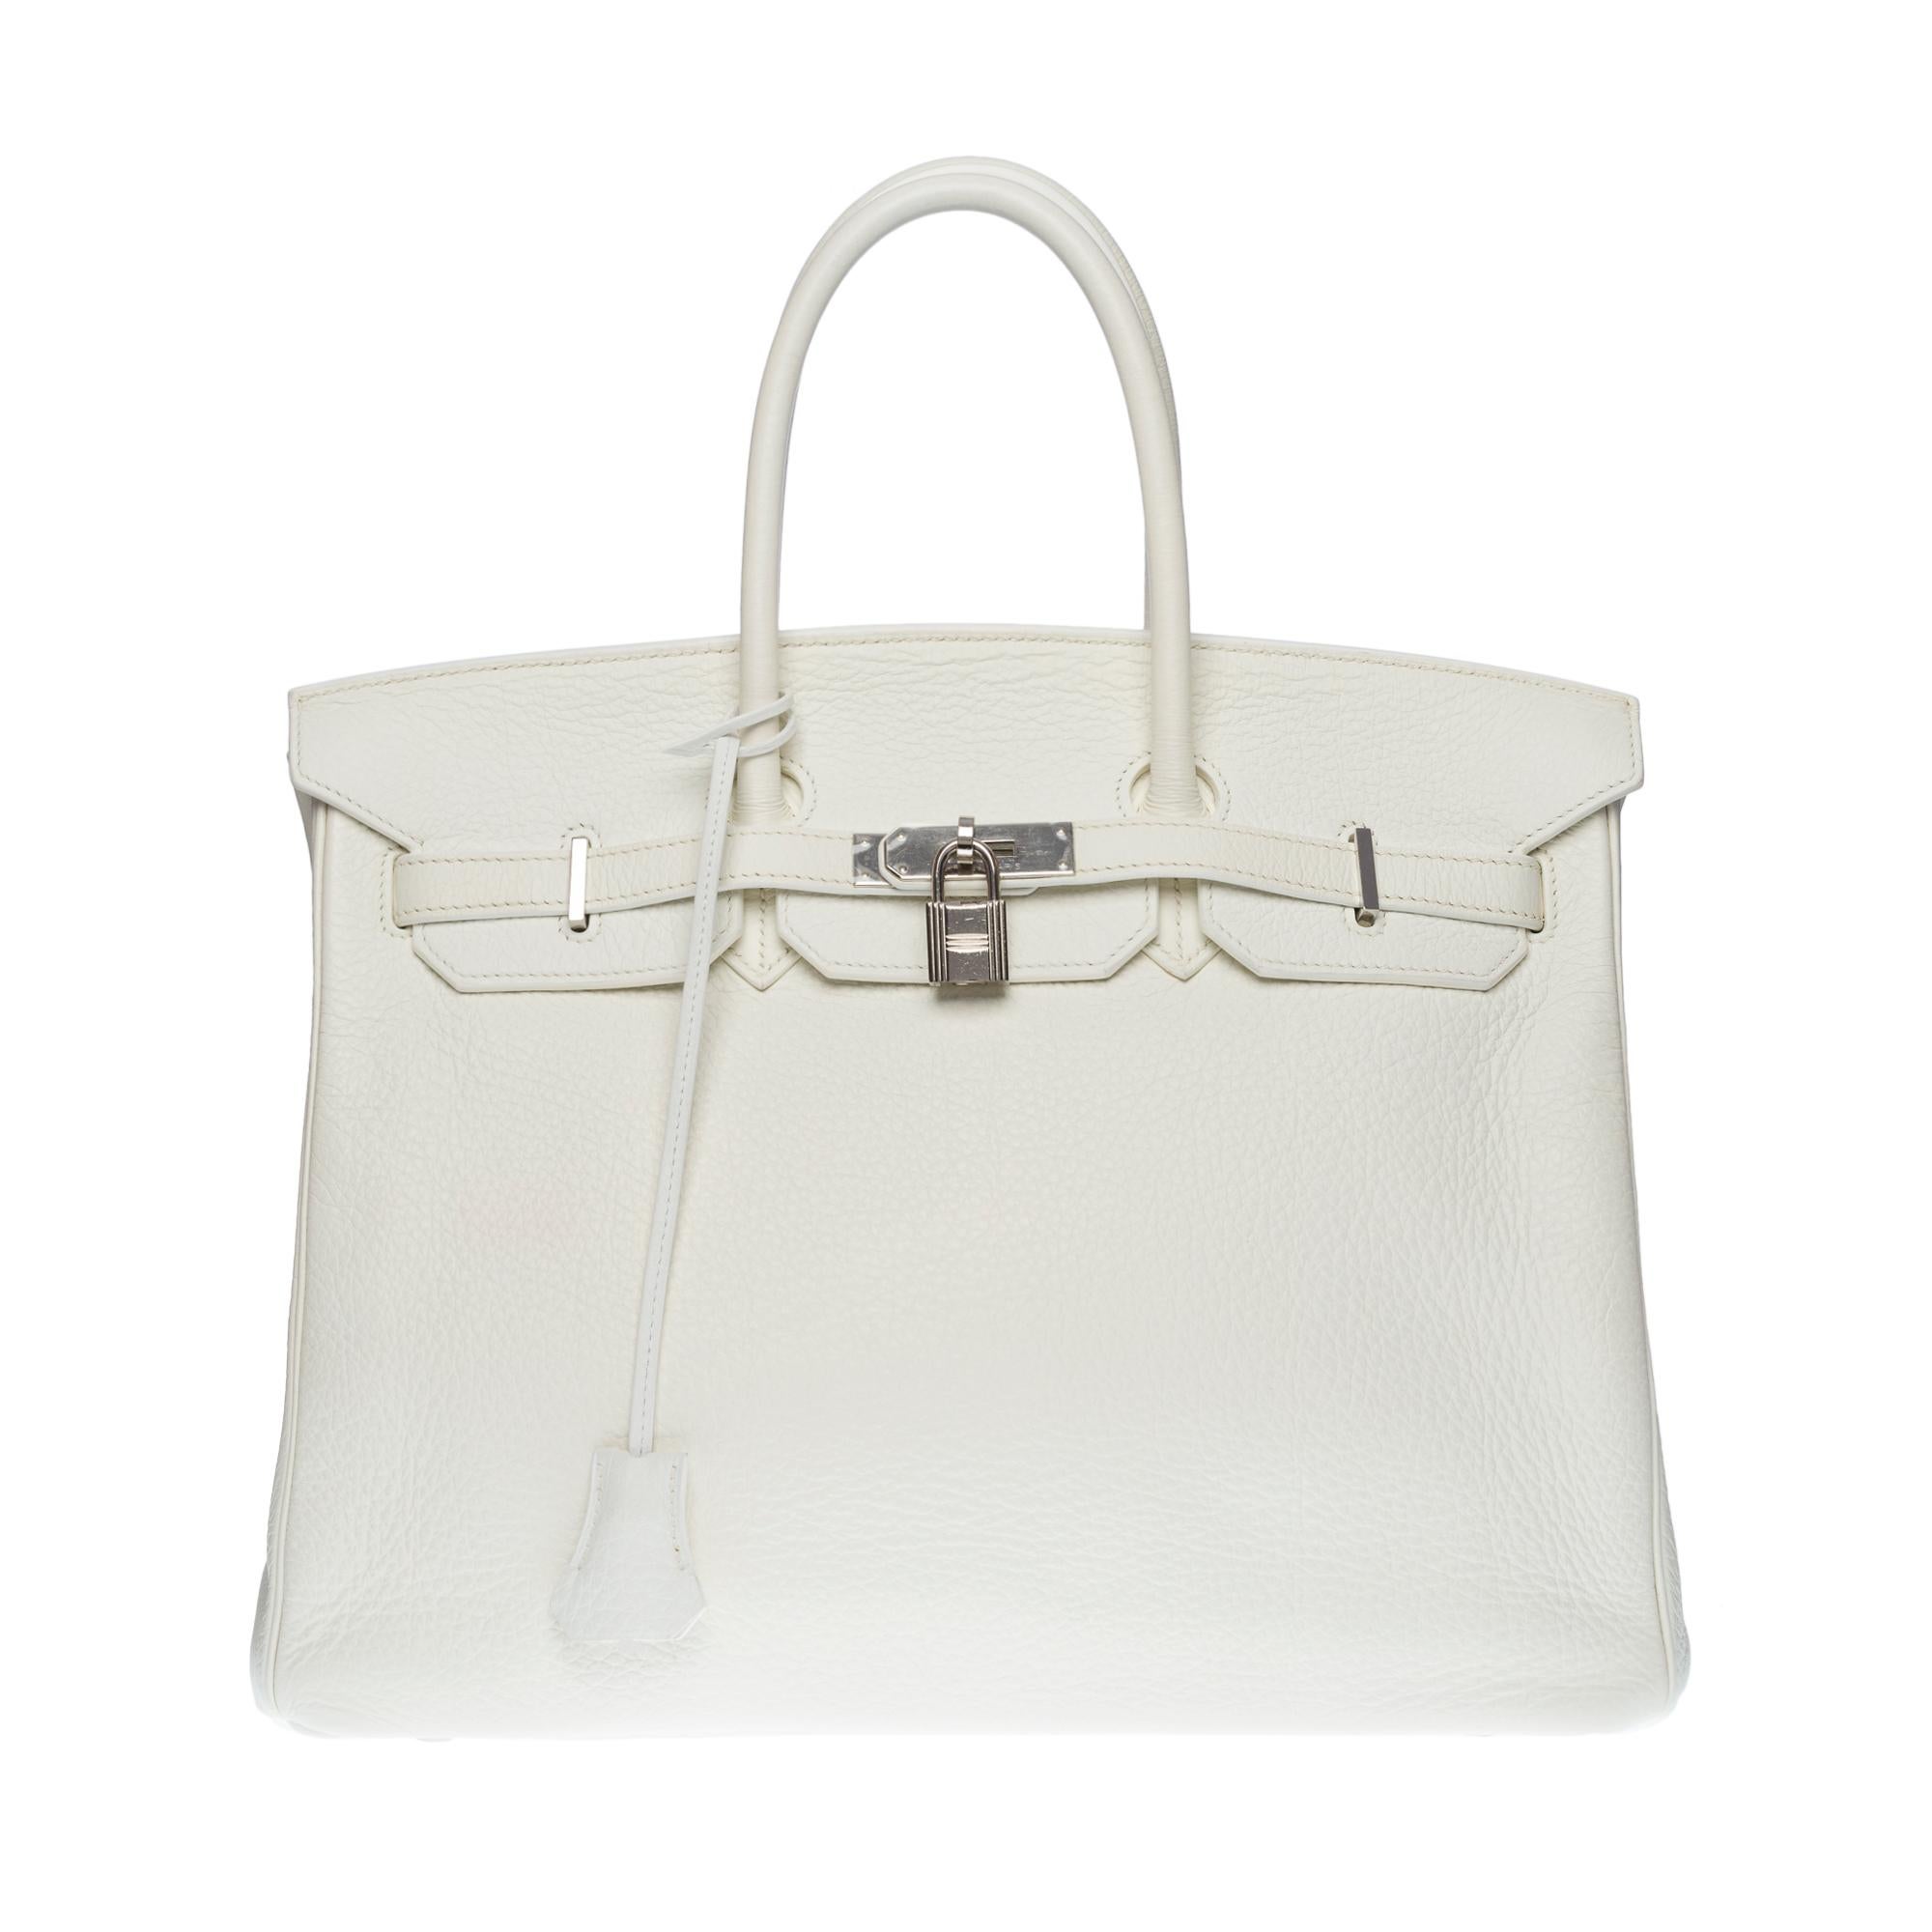 Gorgeous Hermes Birkin 35 handbag in white Taurillon Clémence leather, palladium silver metal hardware, double handle in beige leather allowing a hand-carried
Flap closure
White leather lining, one zippered pocket, one patch pocket
Signature: